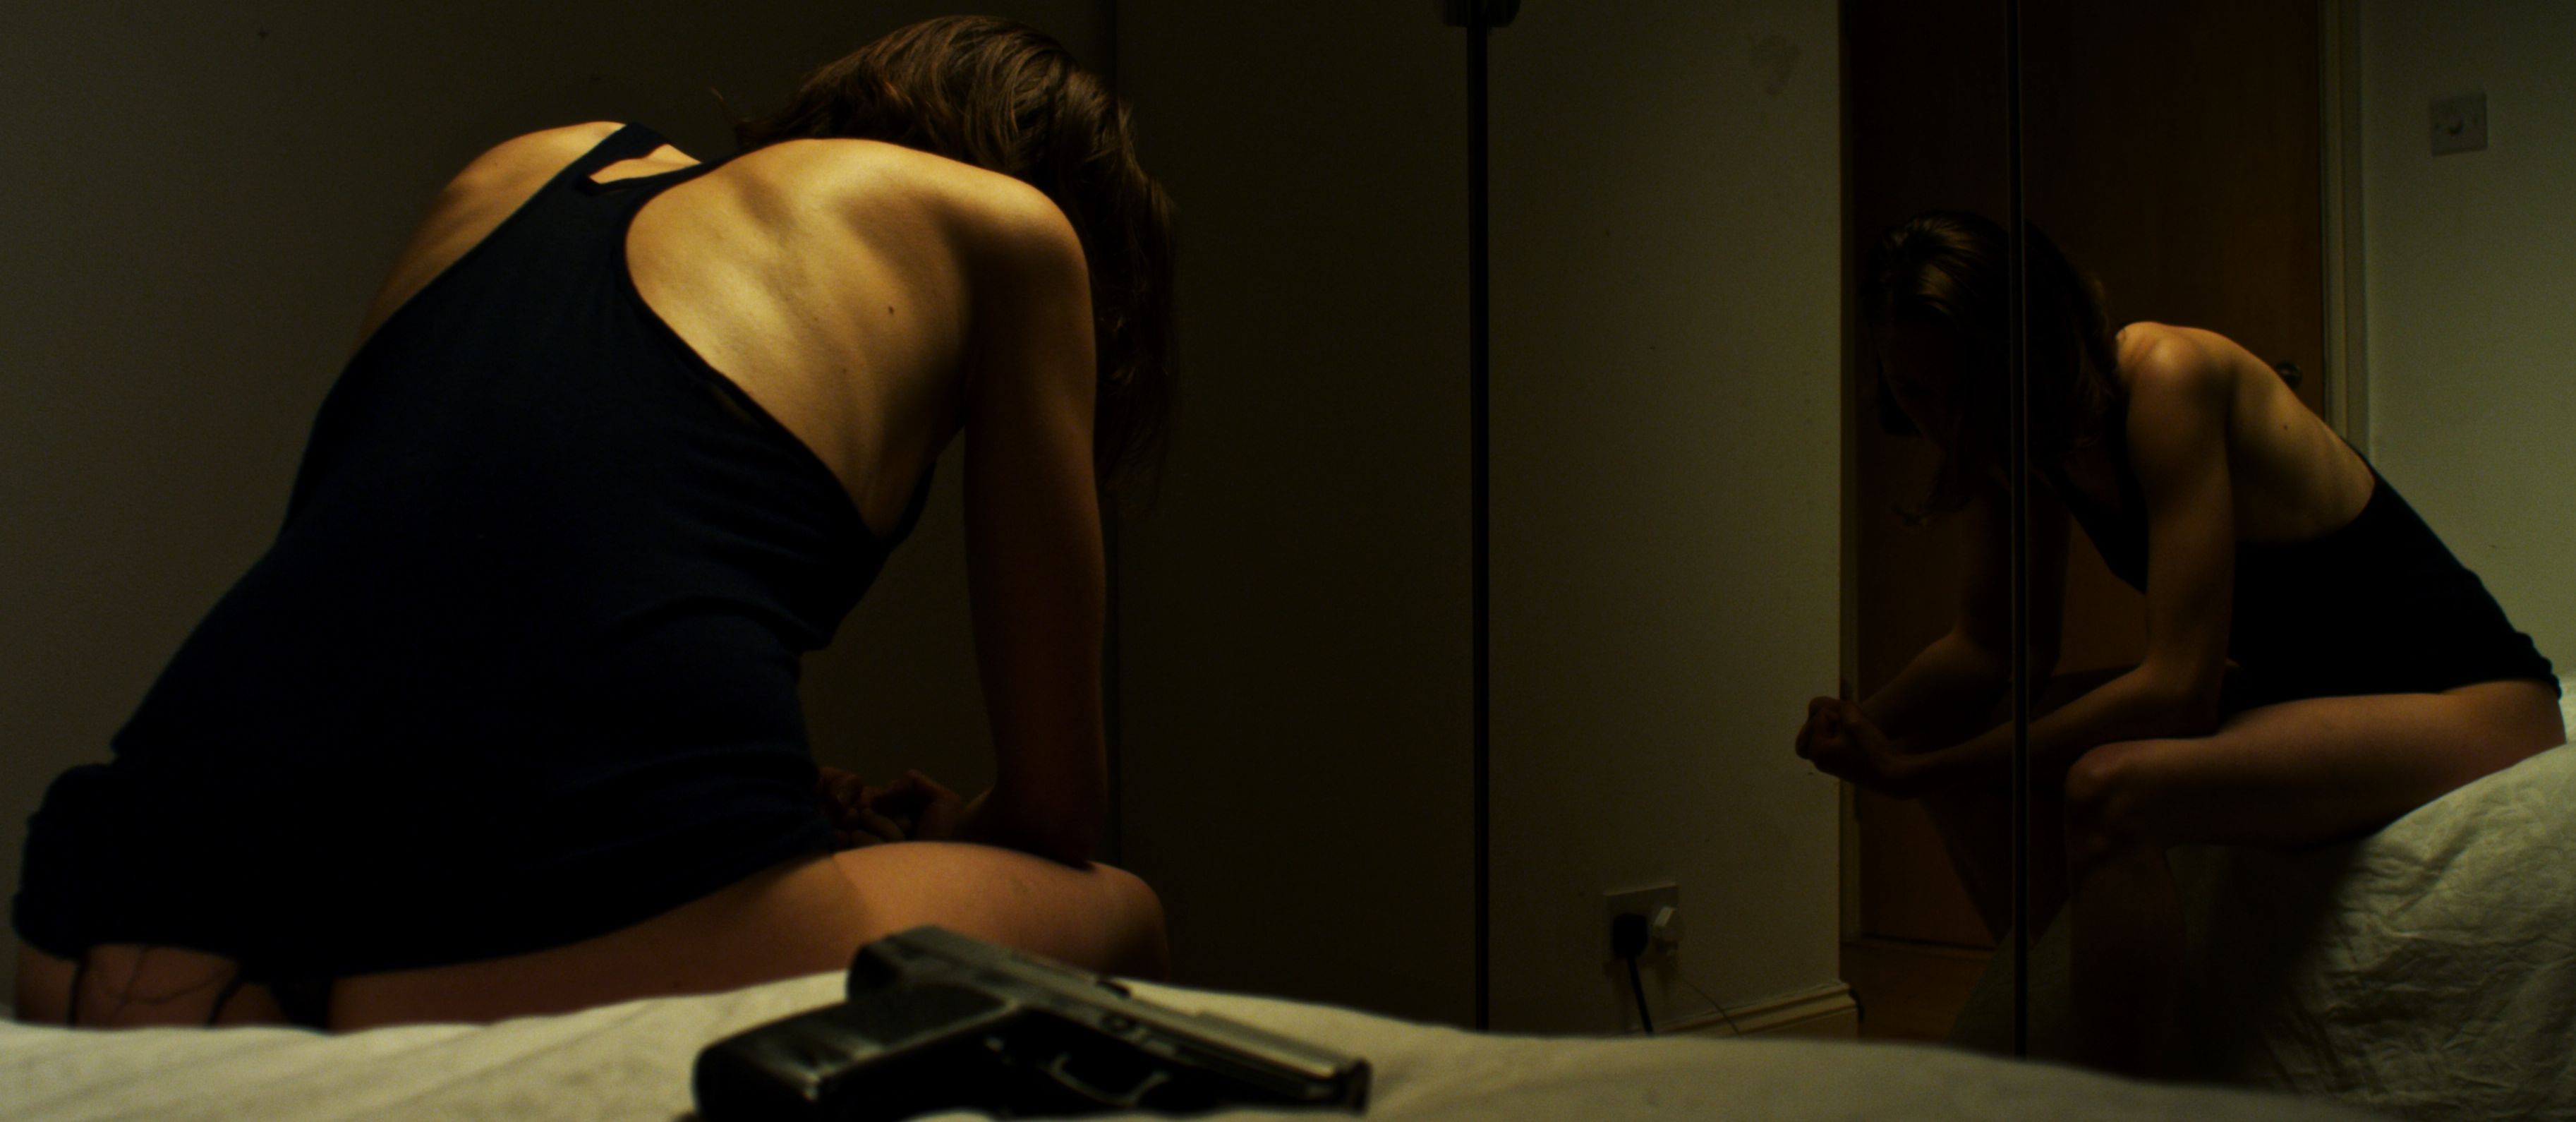 Still from 'Working Title' feature